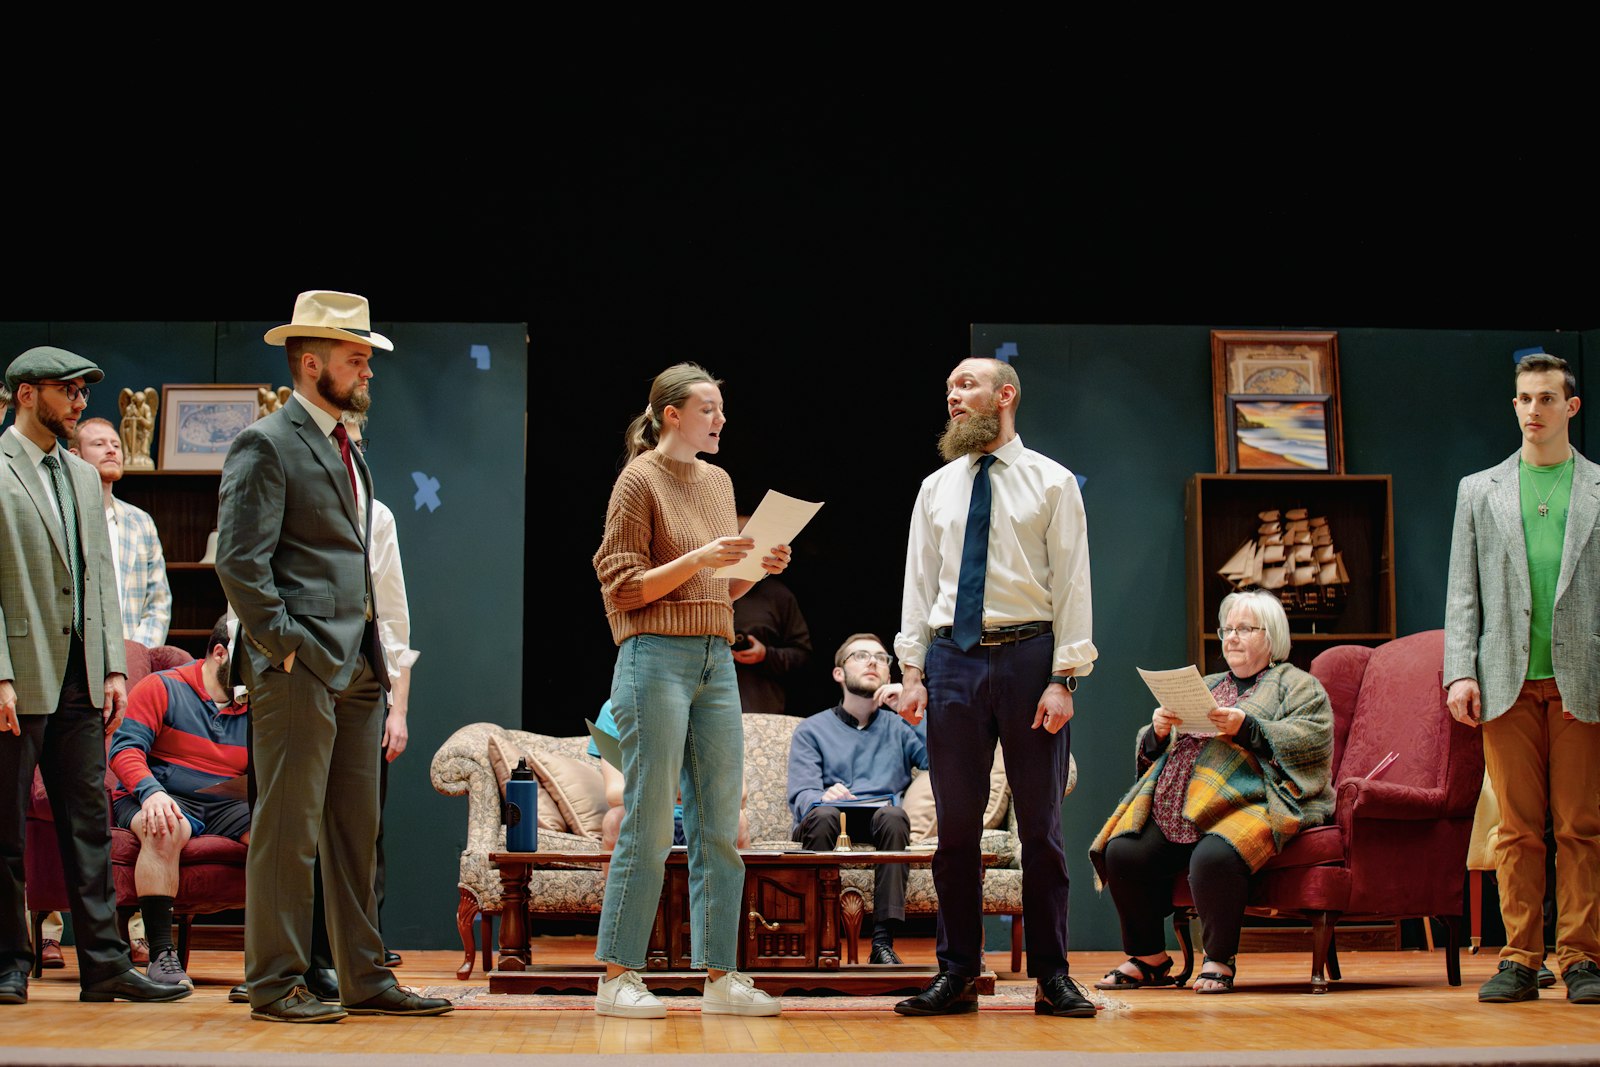 "The Bluff" is more than 10 years in the making, having been written by Deacon Caraher and three friends, Matt Kresich, Scott Peters and George Jurincie. The musical tells the story of Dexter Dull Jr., a young man who wants to become a world-renowned detective like his father.